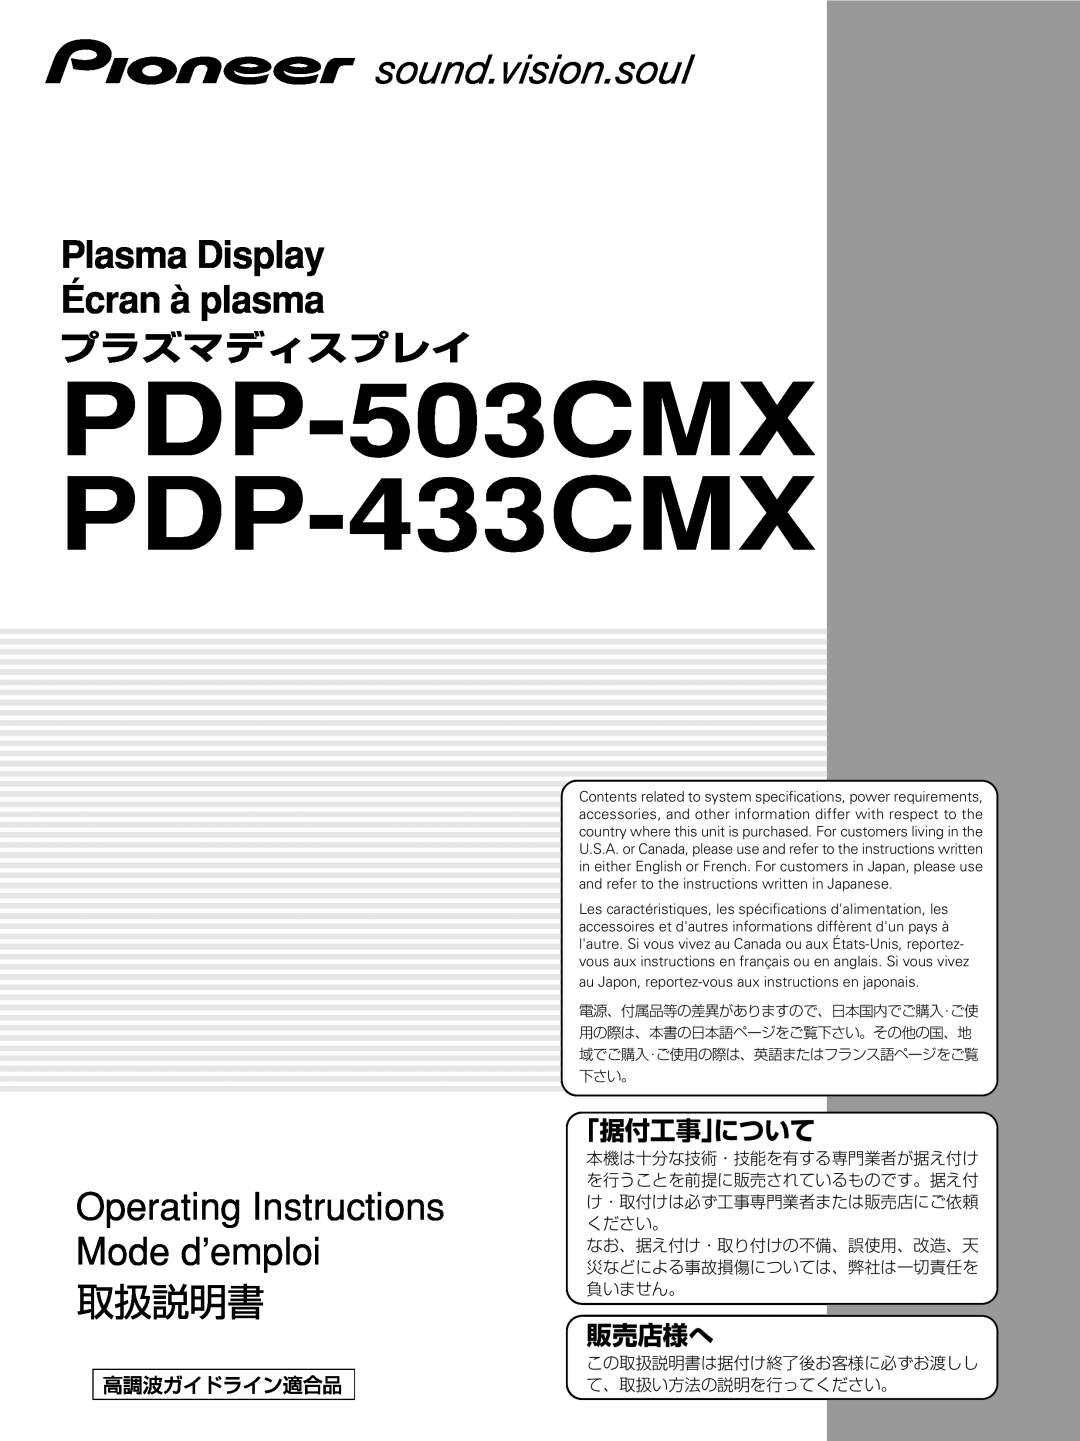 Pioneer PDP 433CMX specifications 「据付工事」について, 販売店様へ, PDP-503CMX PDP-433CMX, Operating Instructions Mode d’emploi 